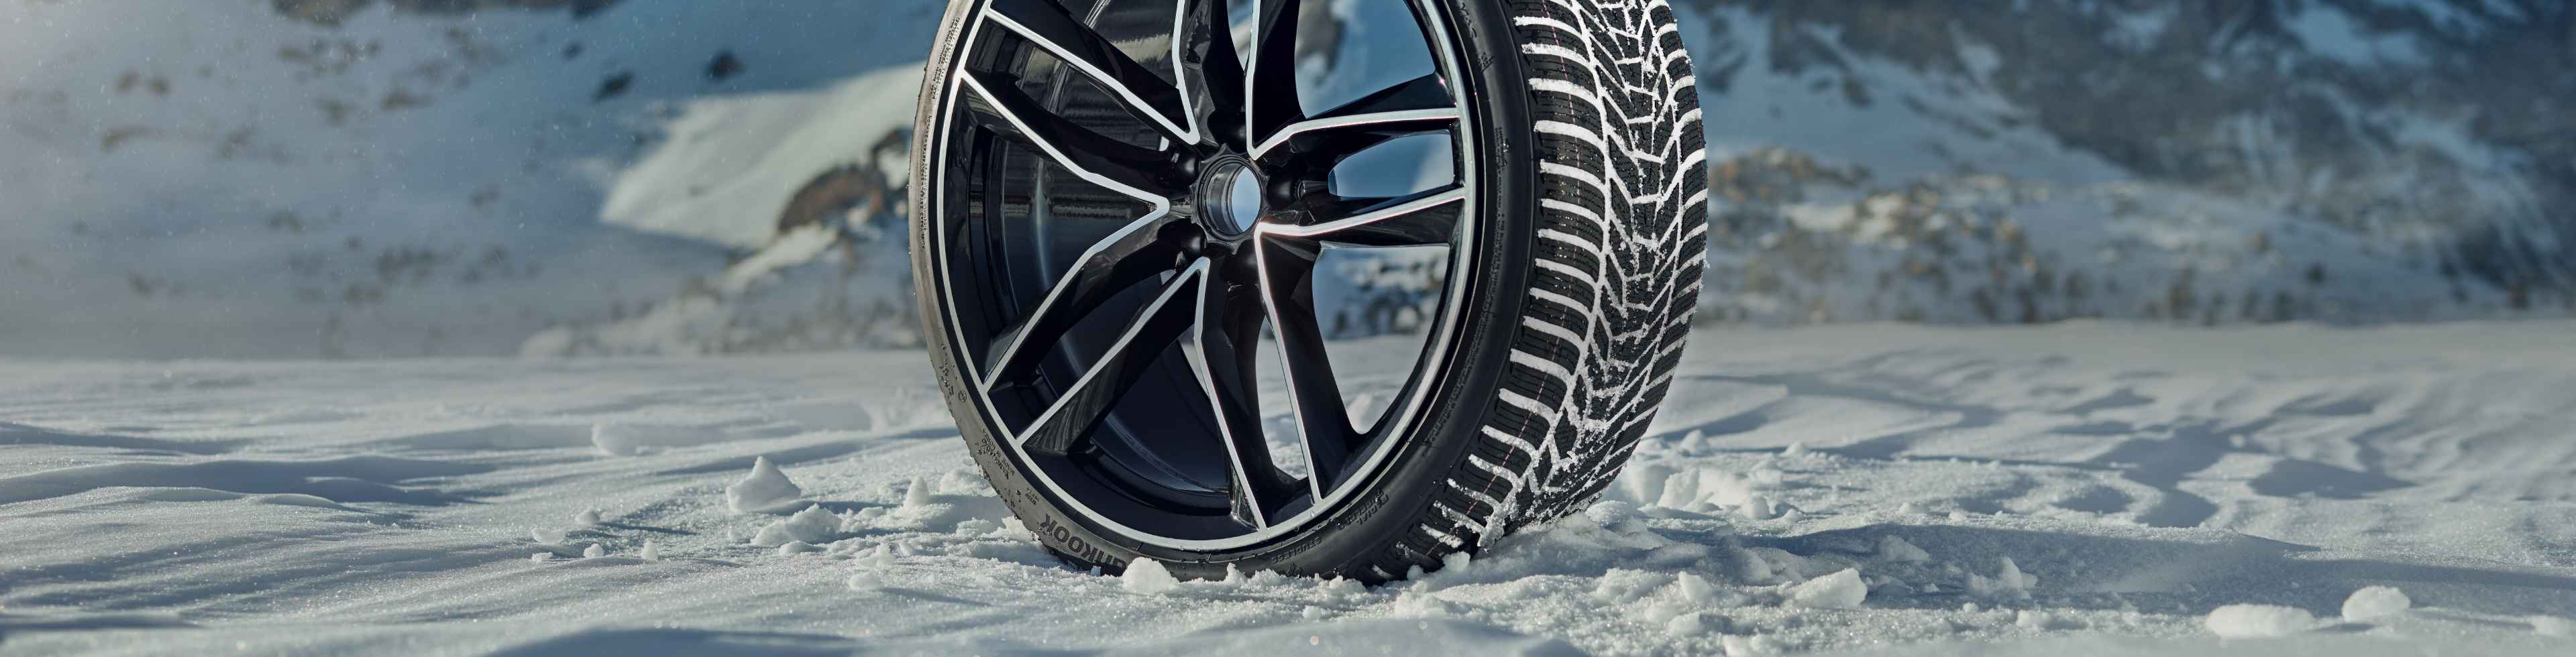 Product Search Winter - Family Tire By I*cept Tire USA Hankook |